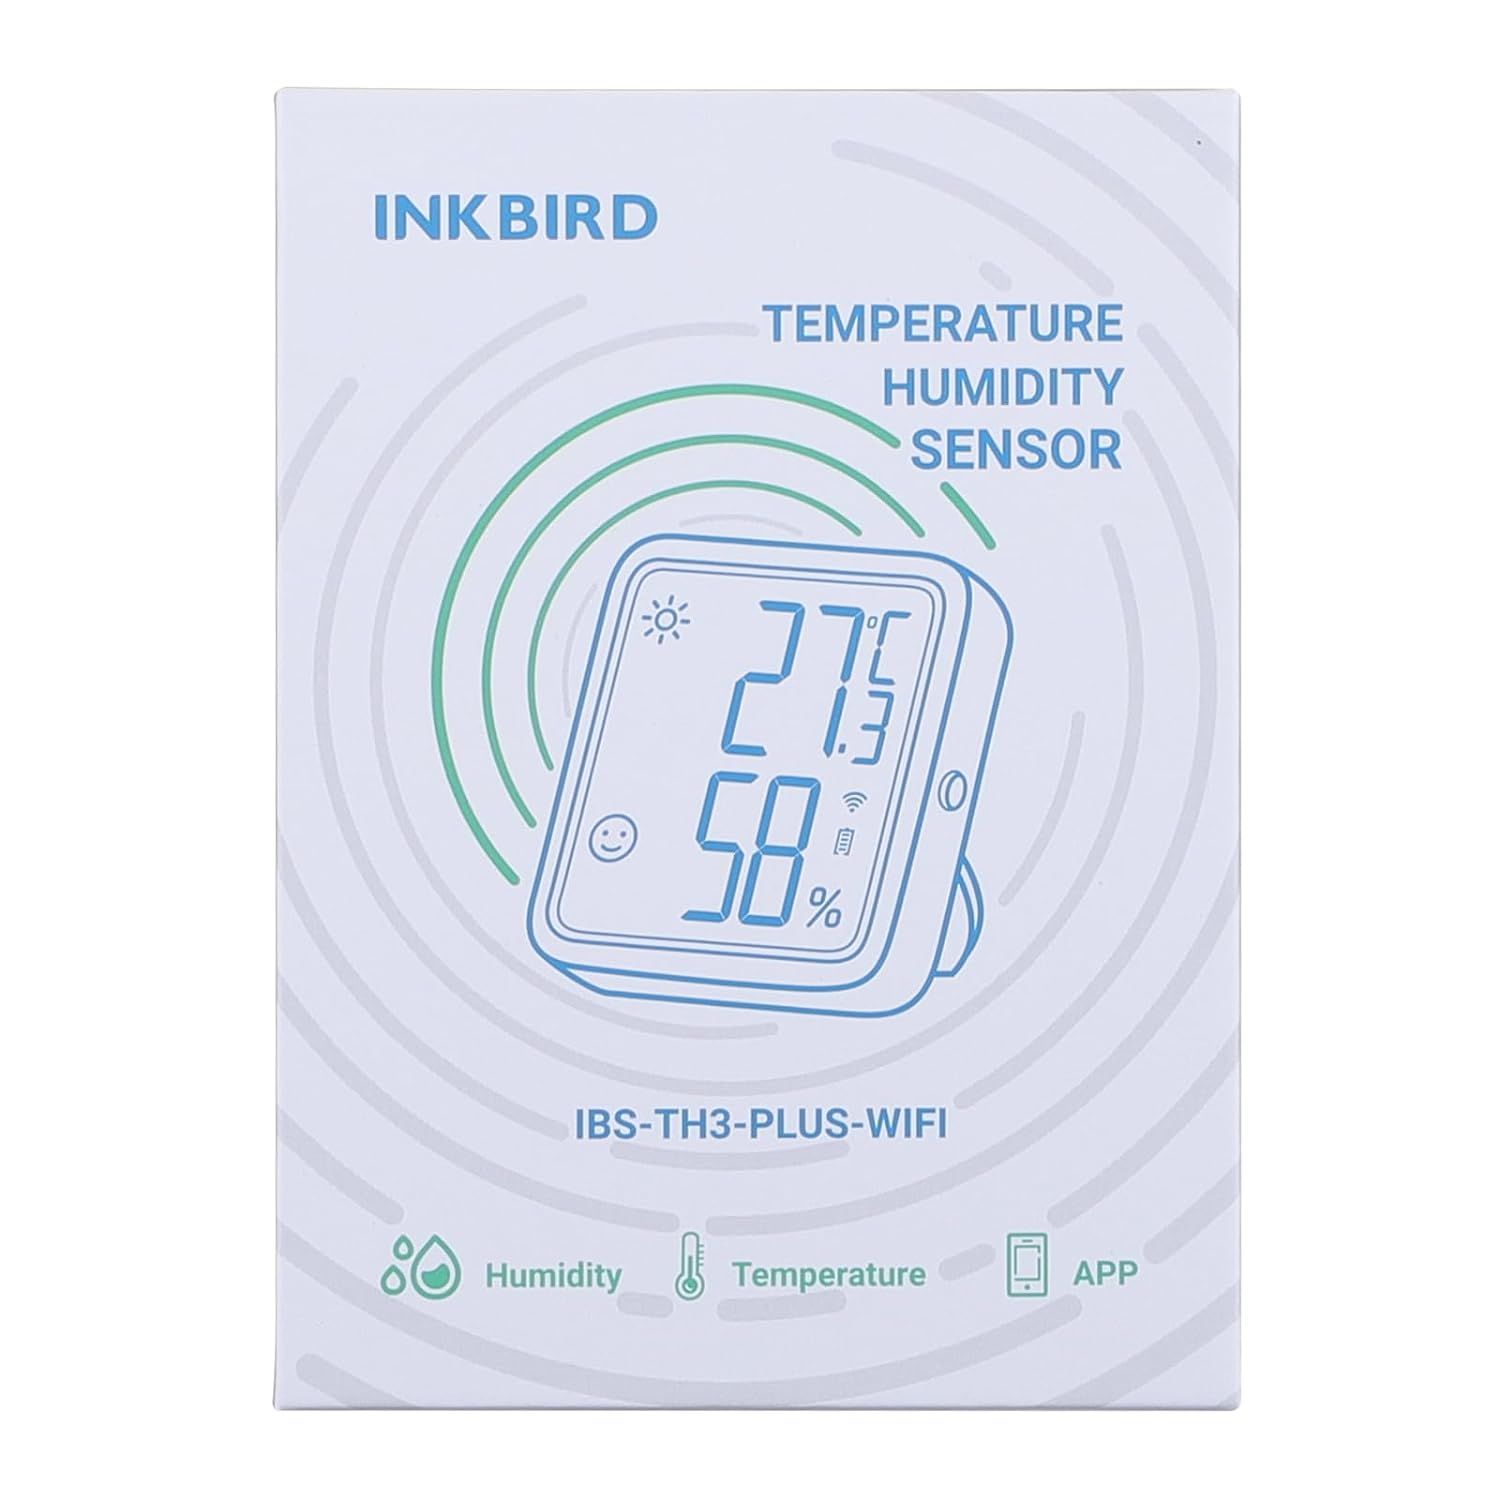 INKBIRD WiFi Thermometer Hygrometer Monitor, Smart Temperature Humidity  Sensor IBS-TH3 with App Notification Alert, 1 Year Data Storage Export,  Remote